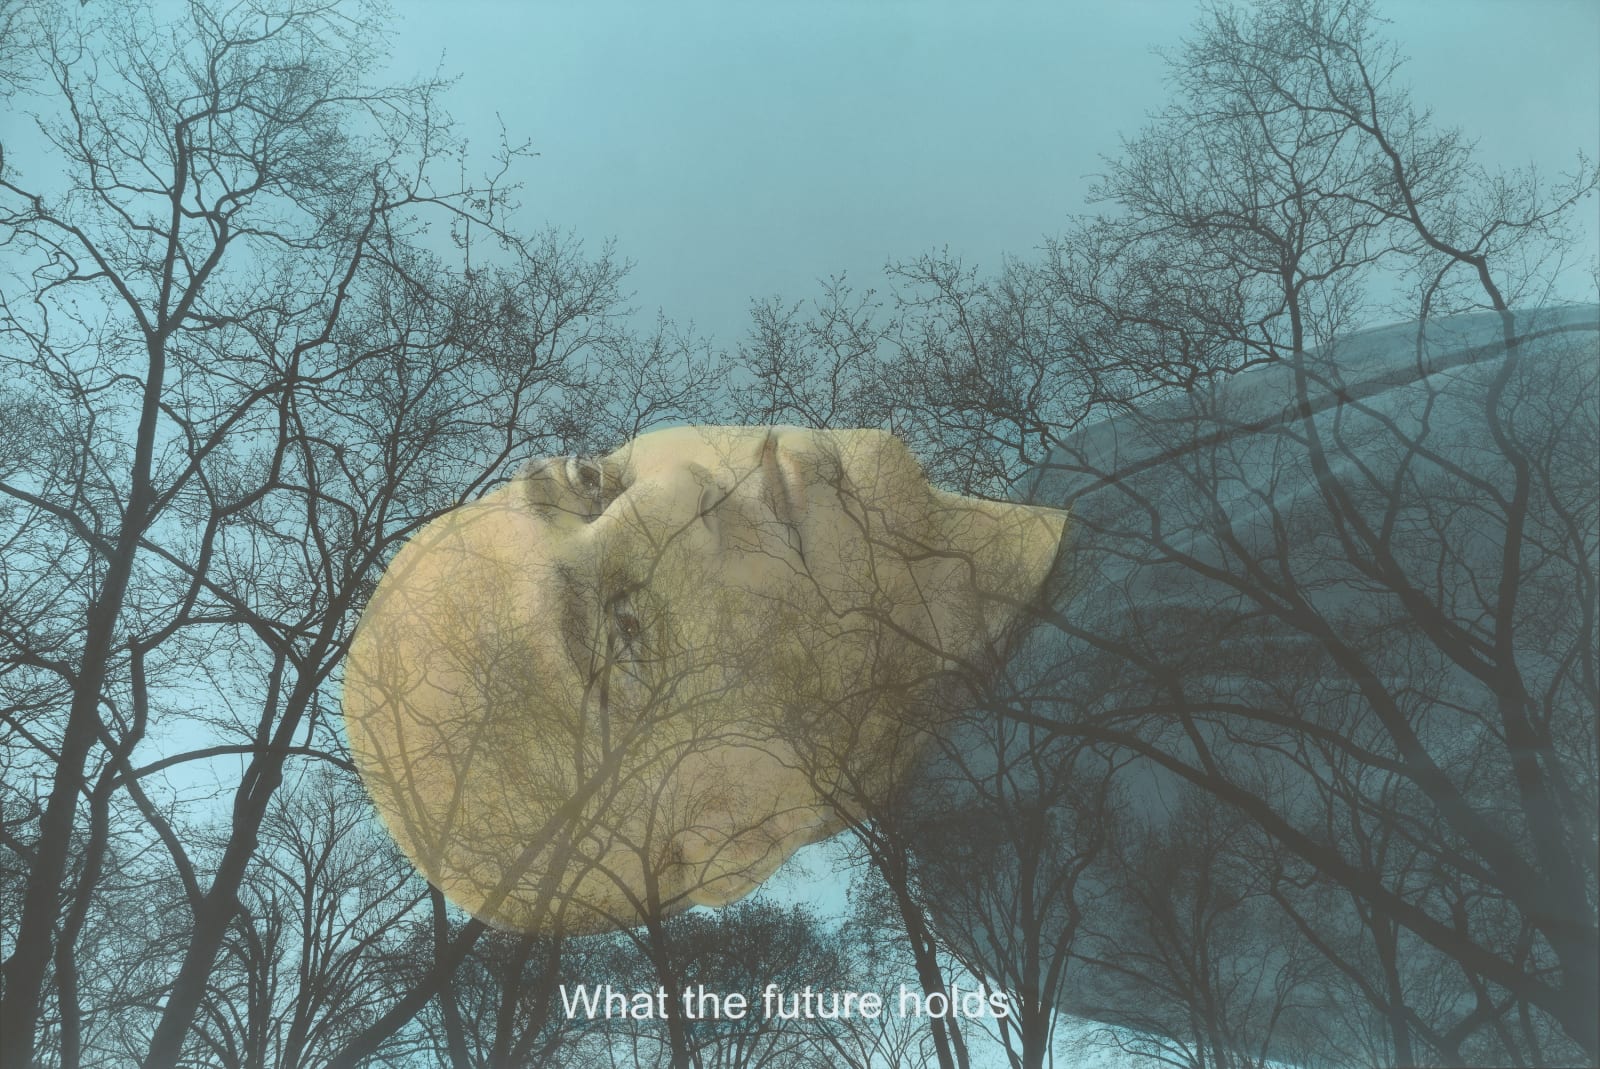 What the future holds, self-portrait, 2021 Hand colored gelatin silverprint 74,5 x 100,5 x 3,5 cm Variation of 5